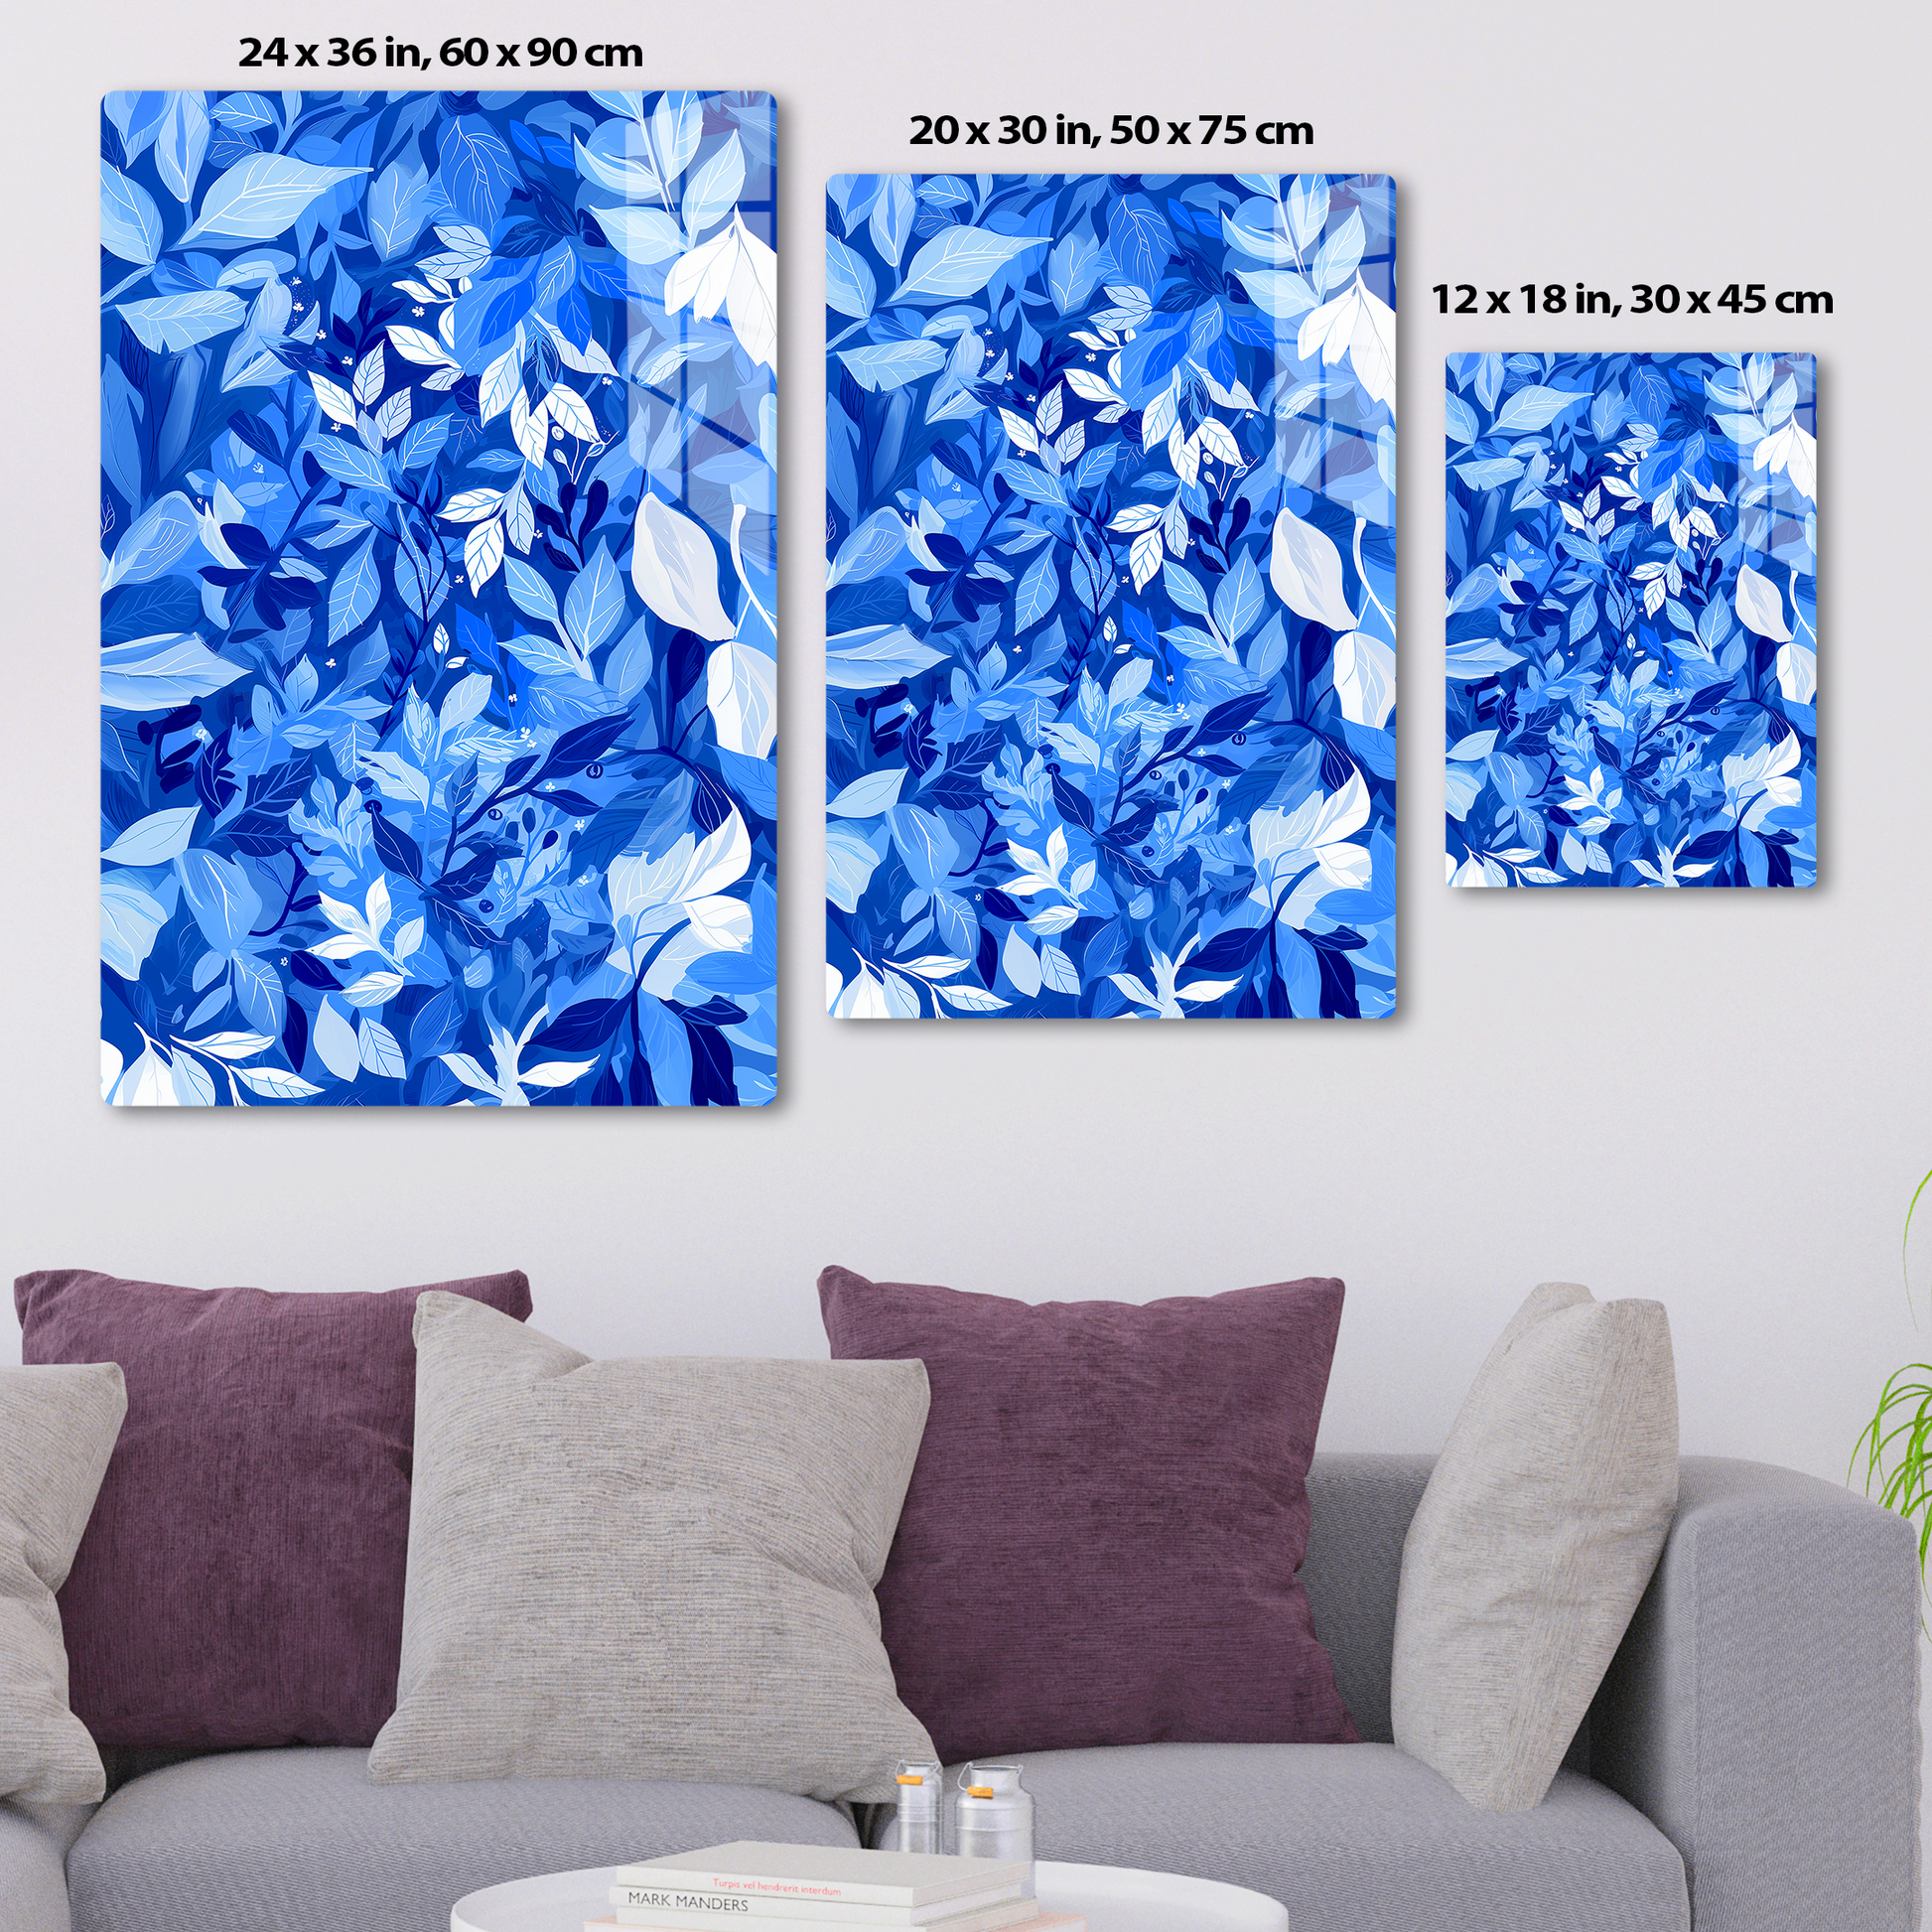 Azure Foliage (Acrylic)Make a statement with Azure Foliage acrylic prints. The 1⁄4" acrylic panel exudes the illusion of a smooth glass surface for vibrant artwork. Pre-installed hanging hRimaGallery